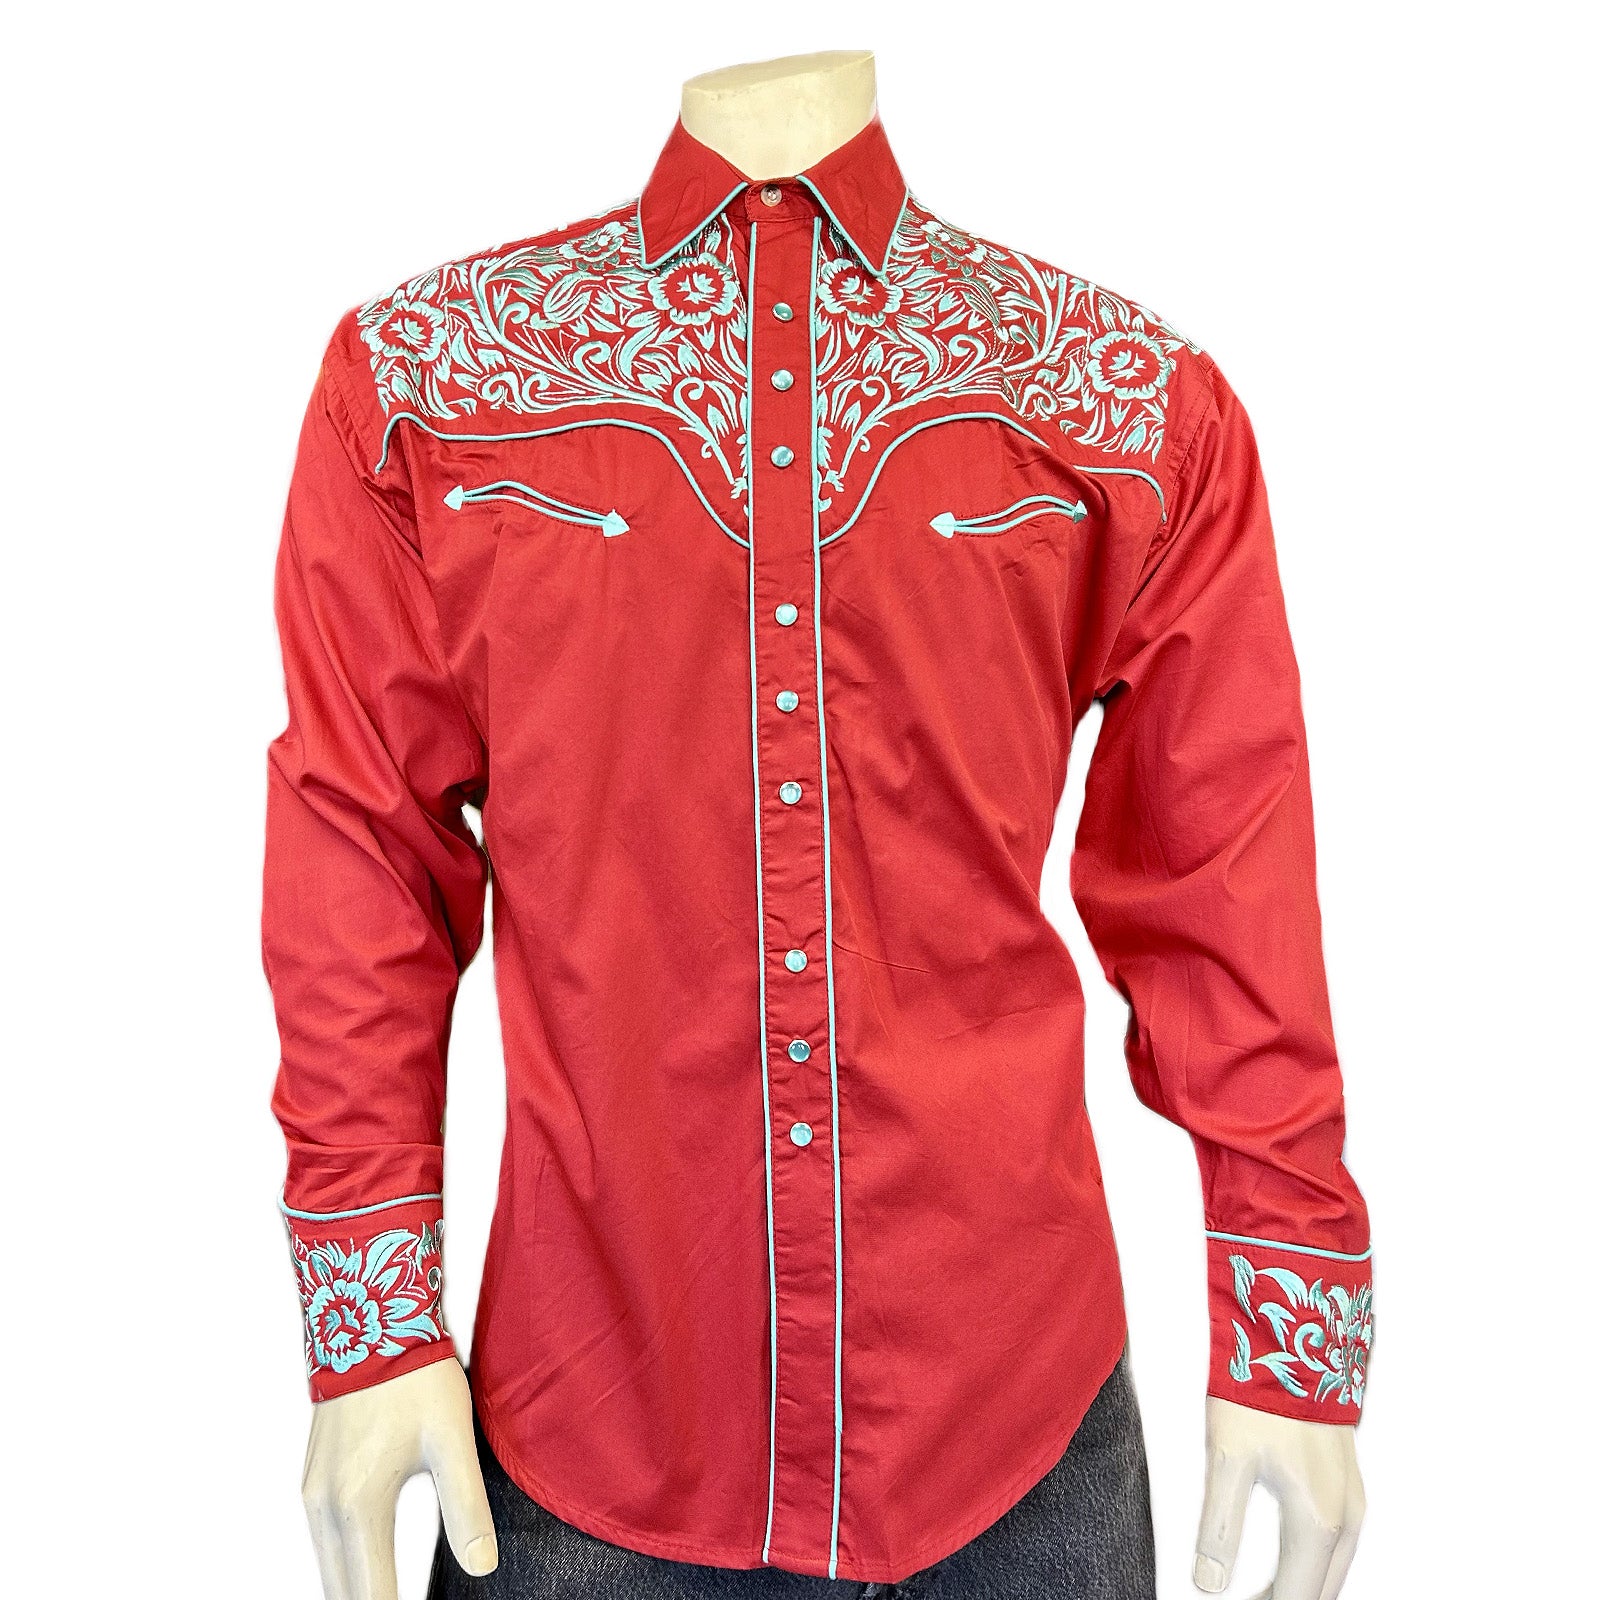 Men's Vintage Tooling Embroidered Coral & Turquoise Western Shirt